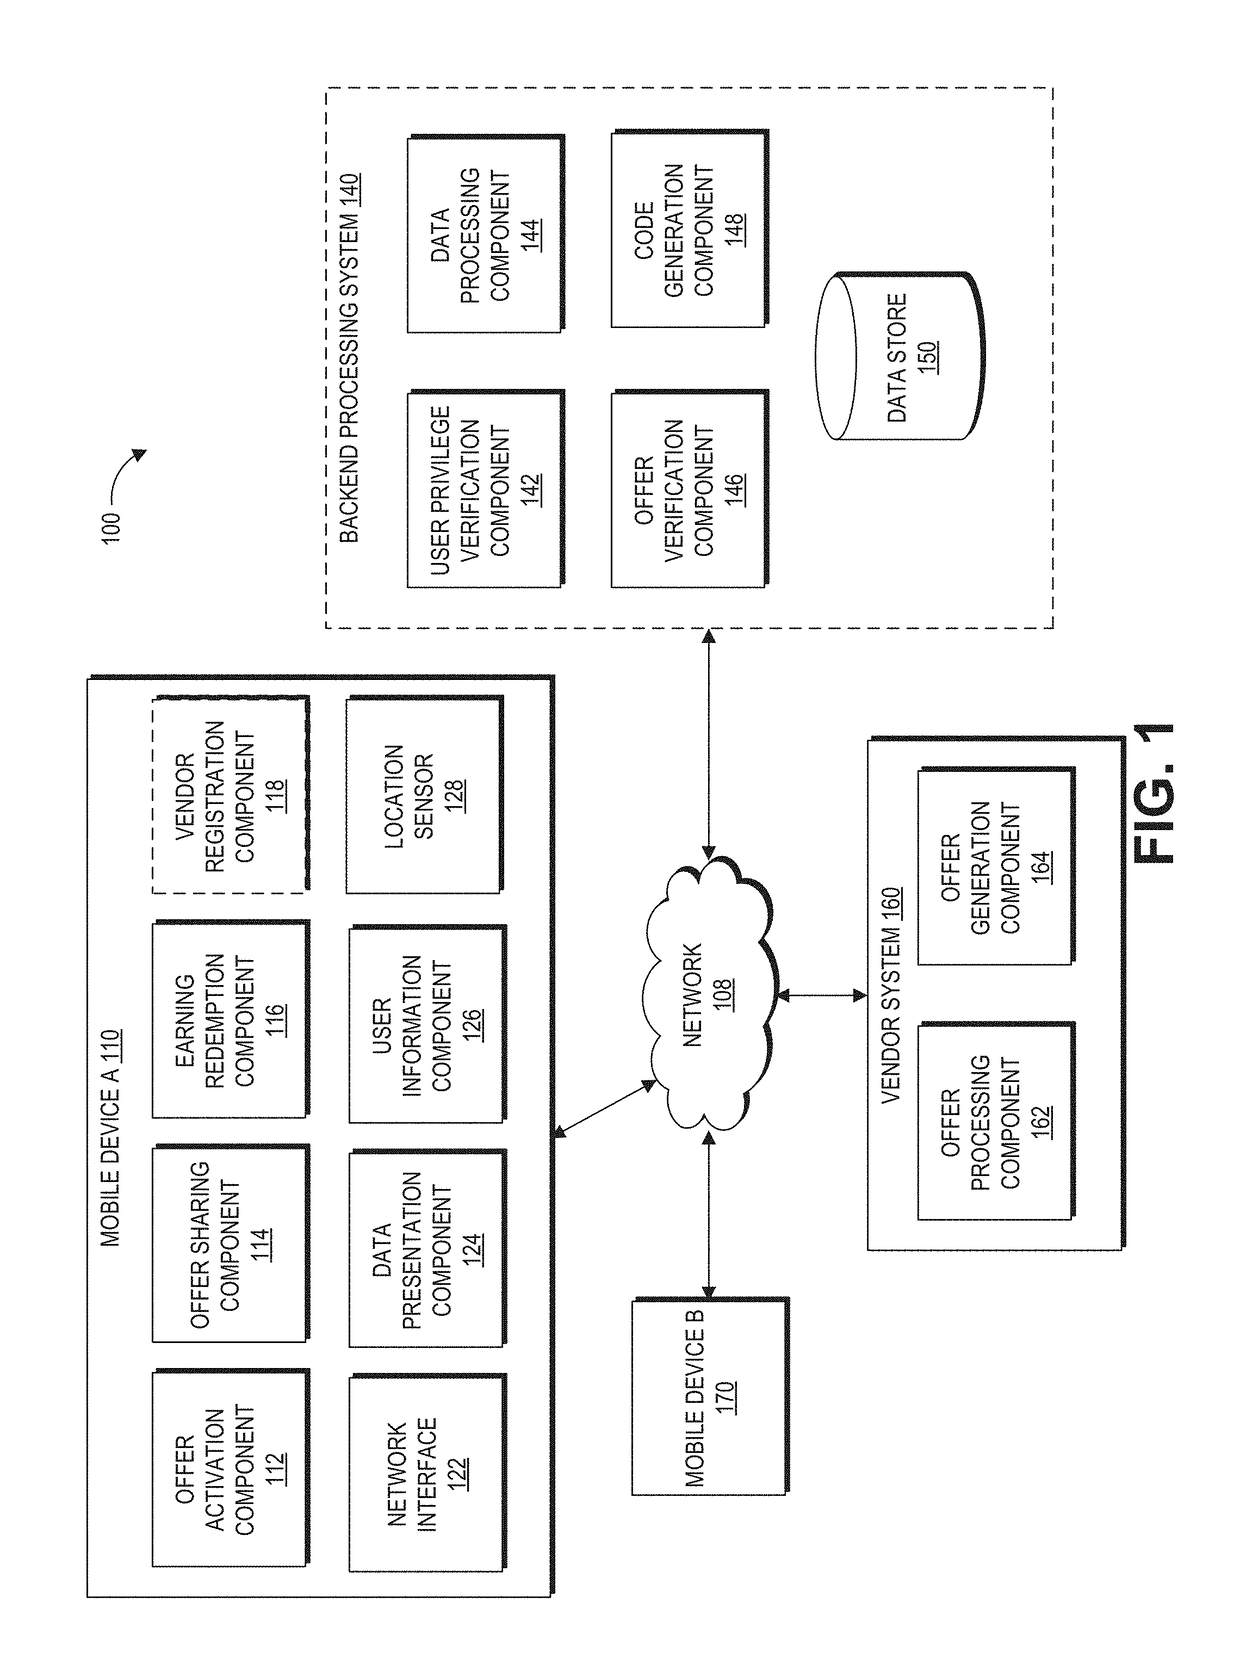 Systems and methods for a trust-based referral system utilizing a mobile device